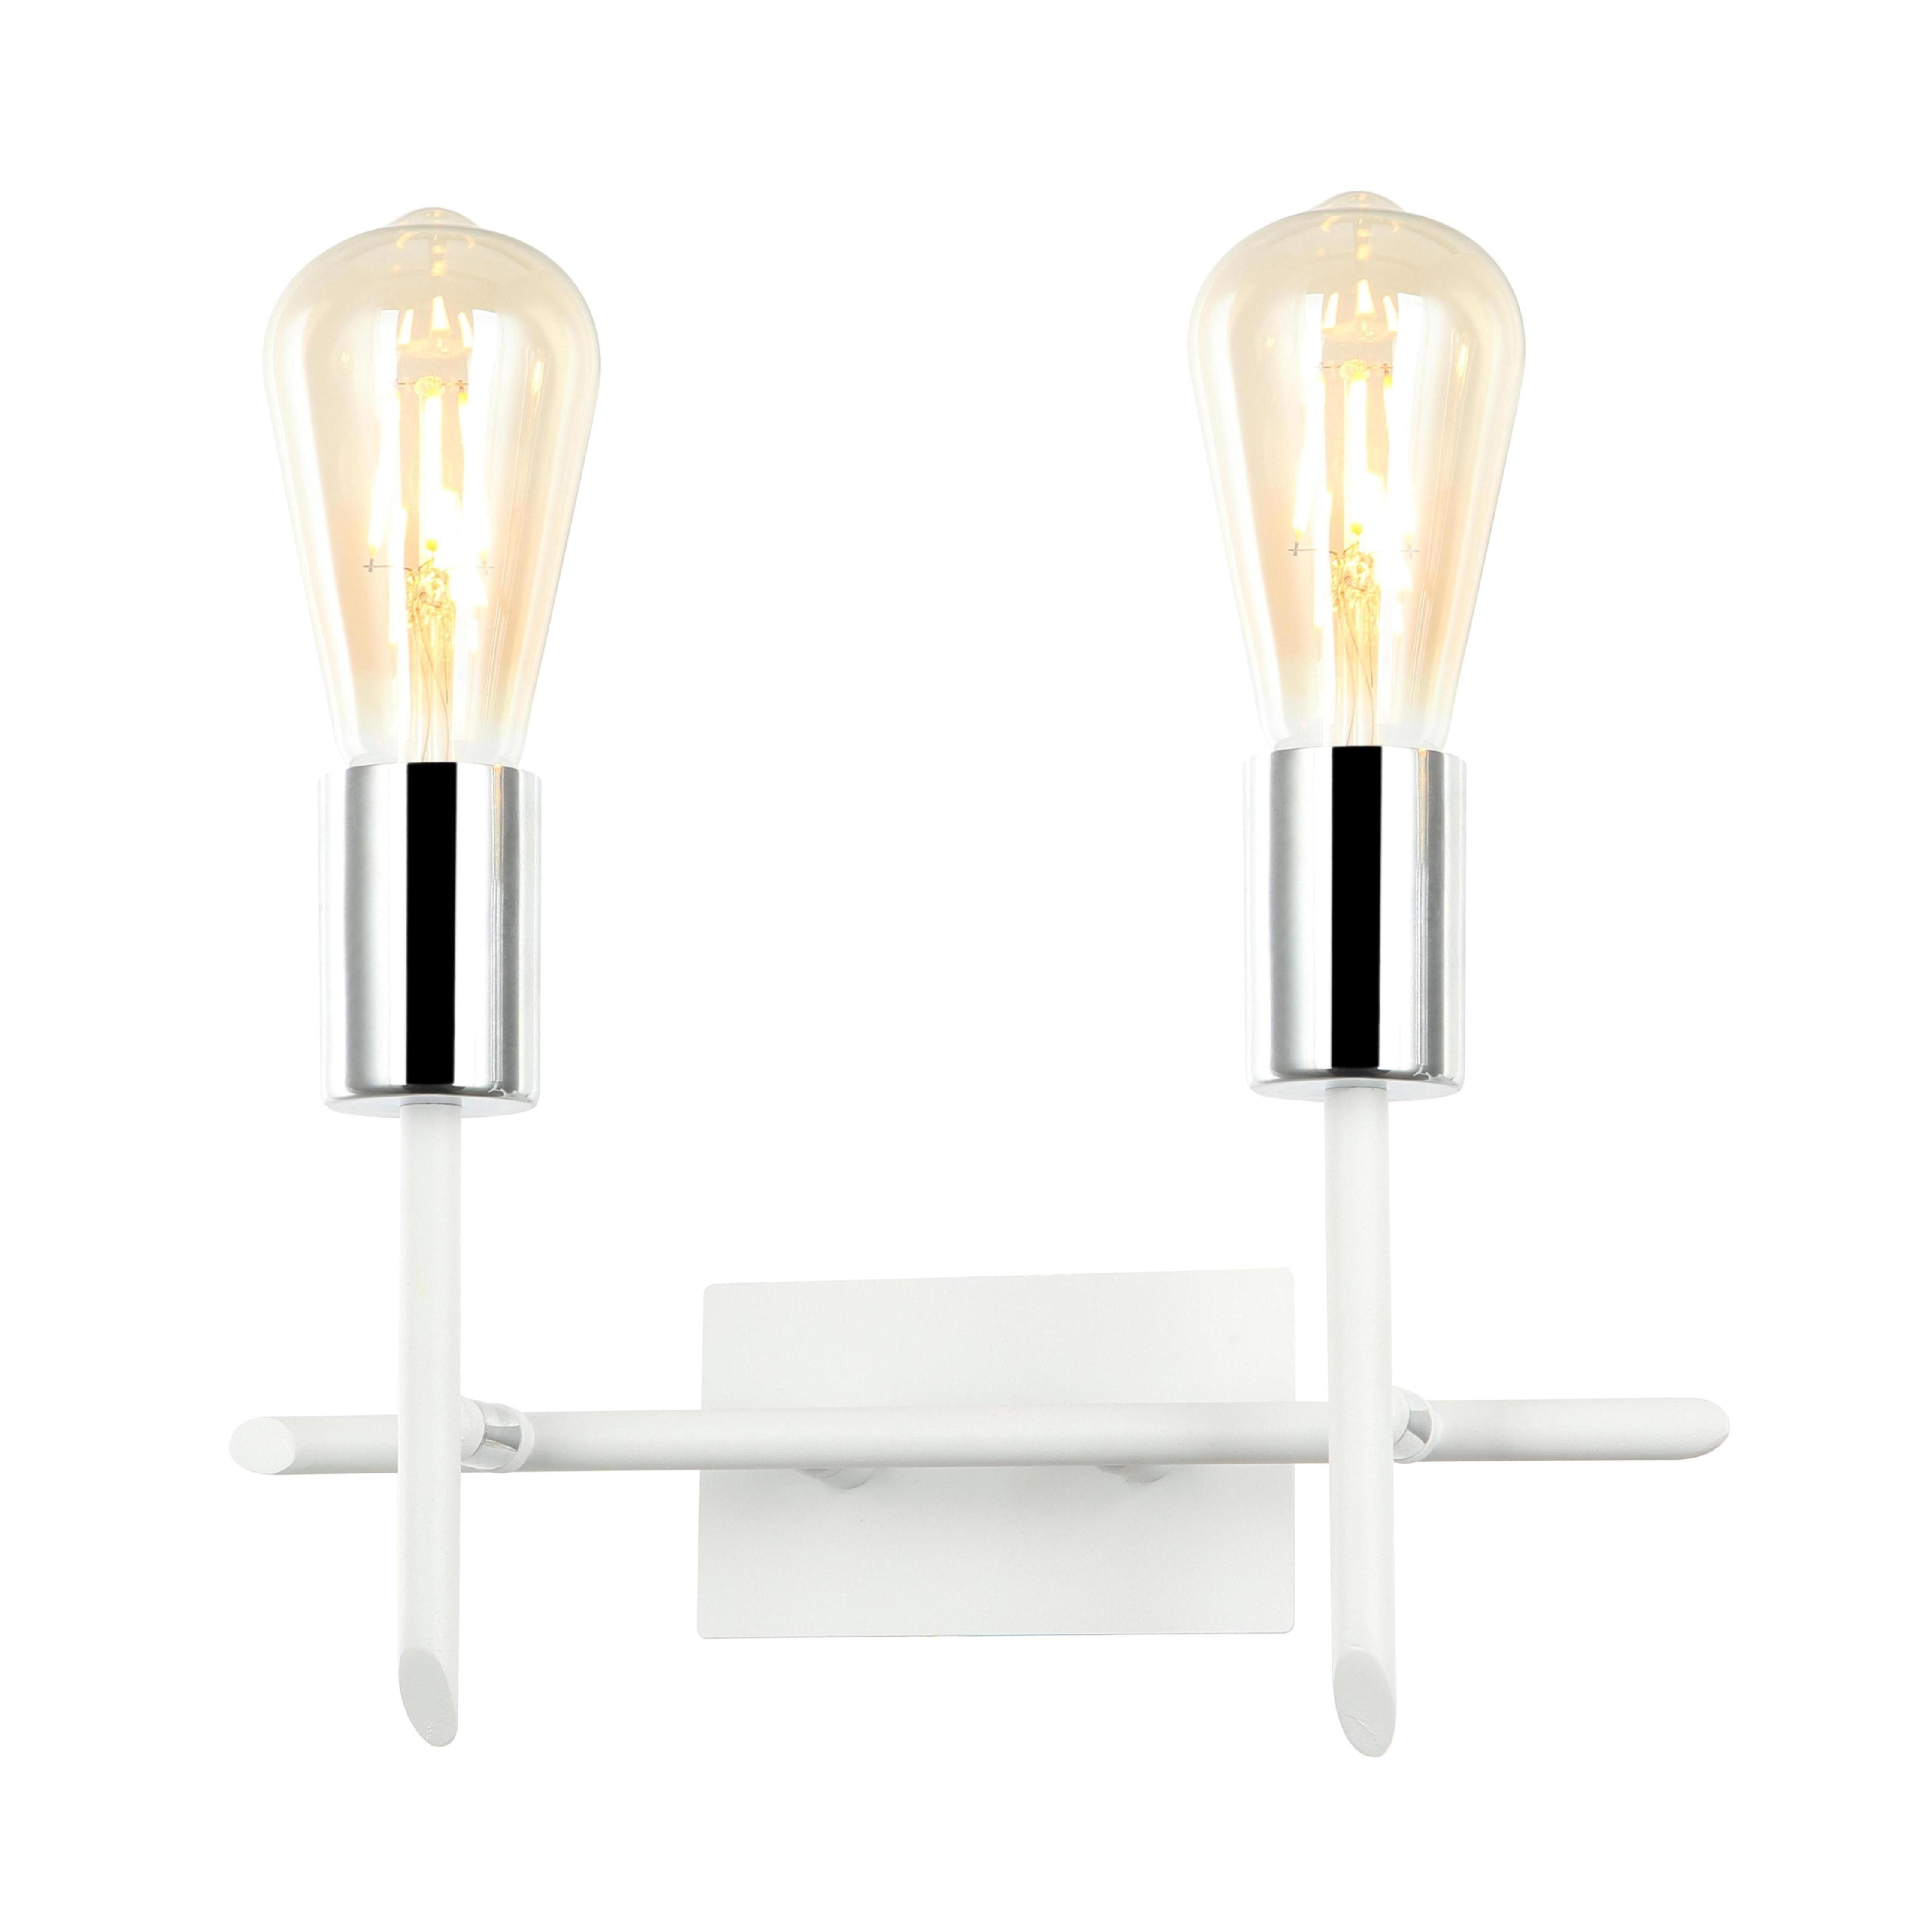 Saintly sconce contemporary lamps free design for bathroom-1